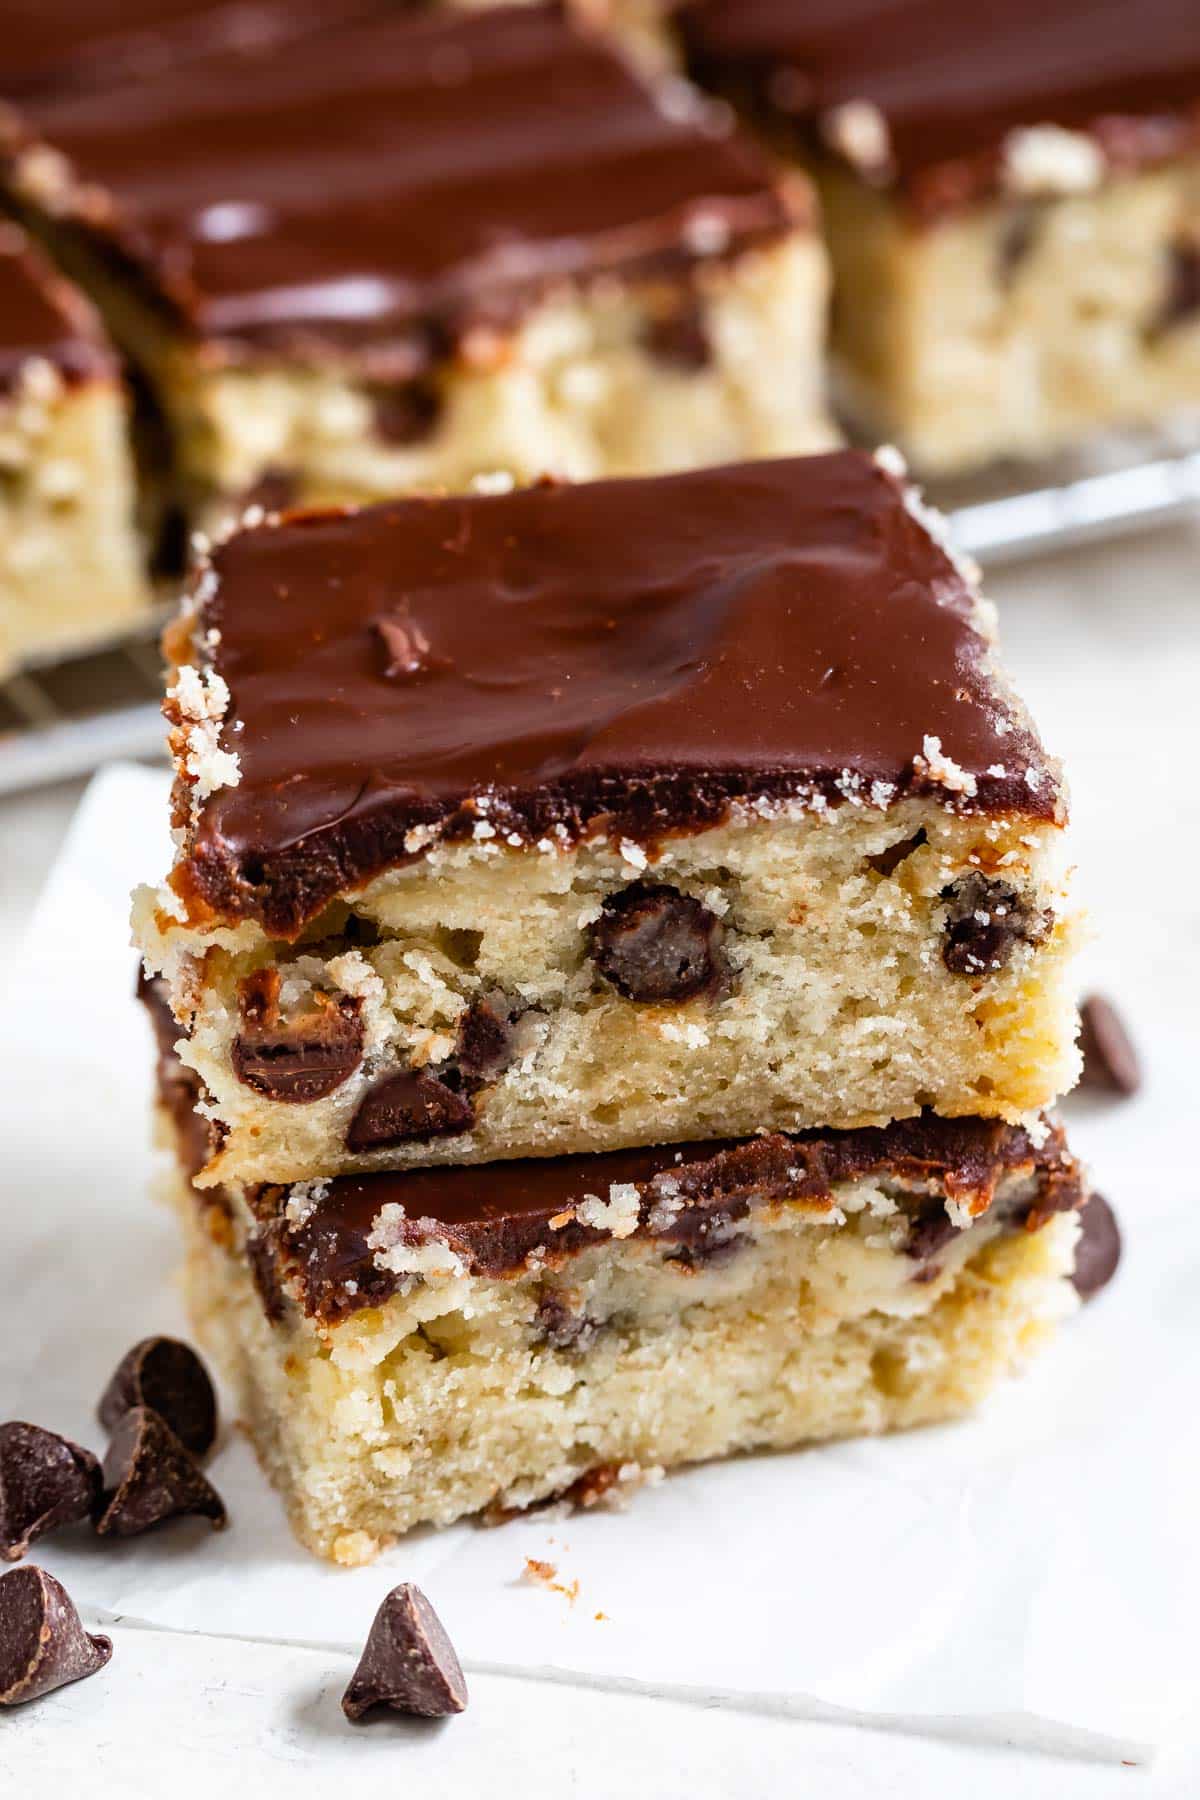 stacked banana bars with chocolate chips baked in.